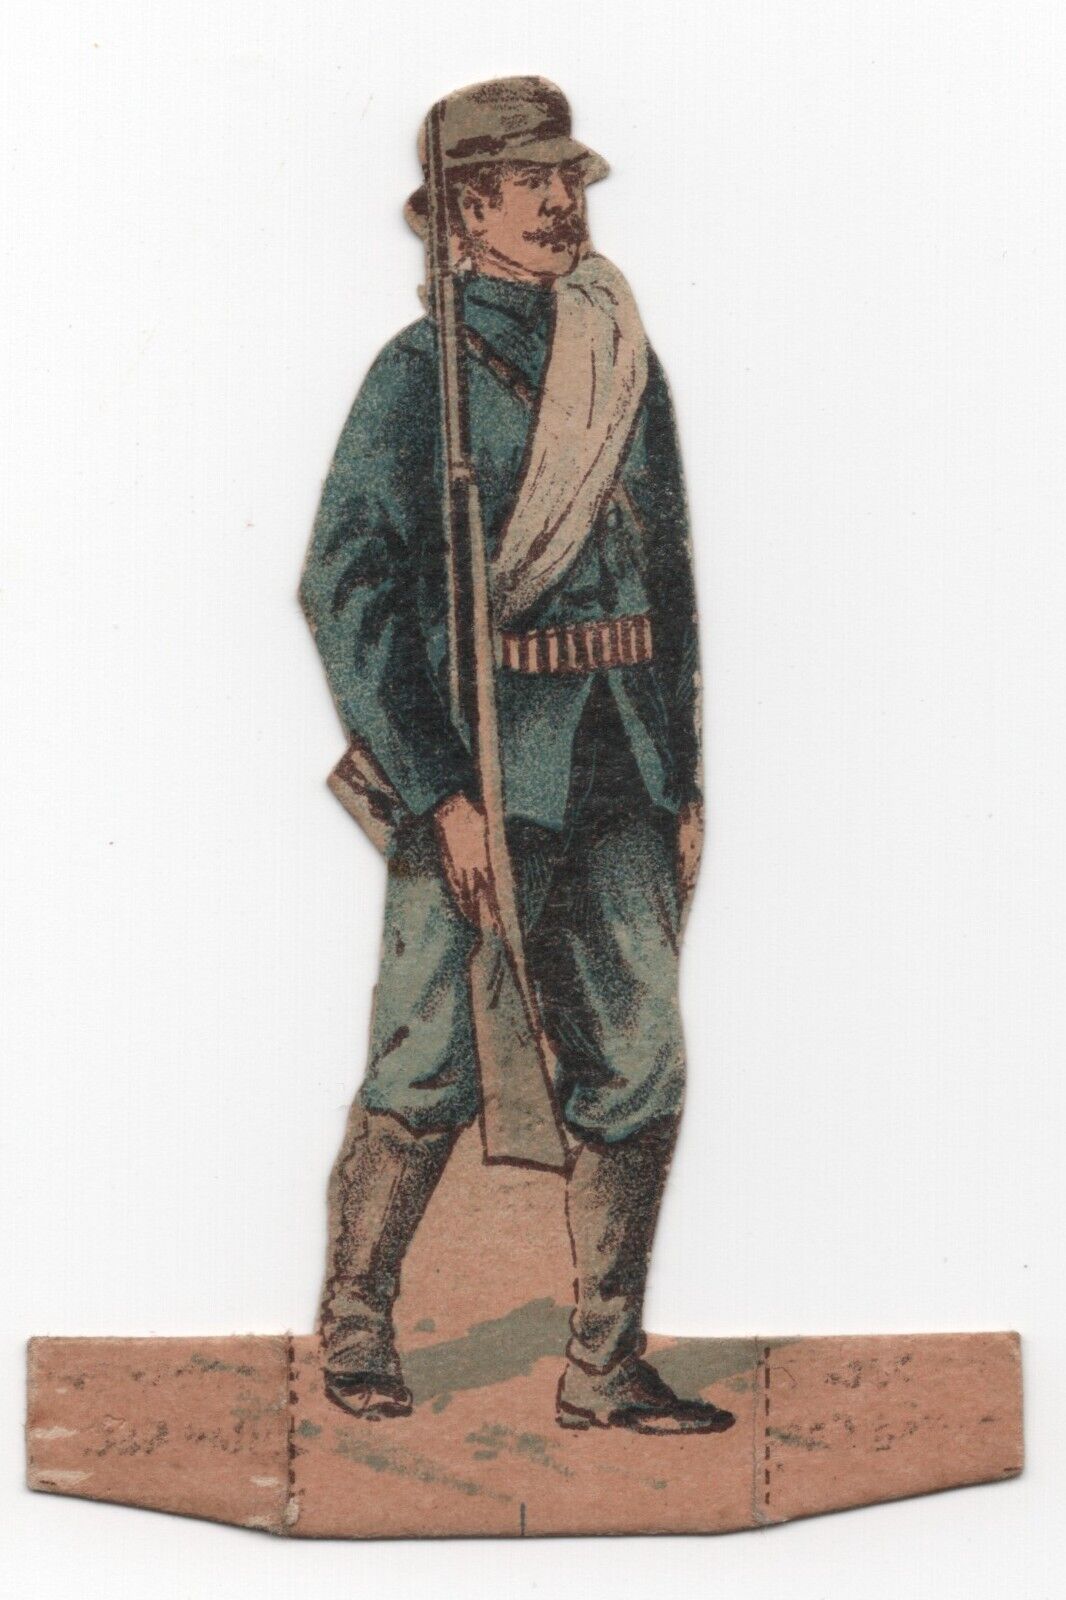  Spanish American War Die Cut Soldier Card Armour Meat Chicago 1890s-1900s